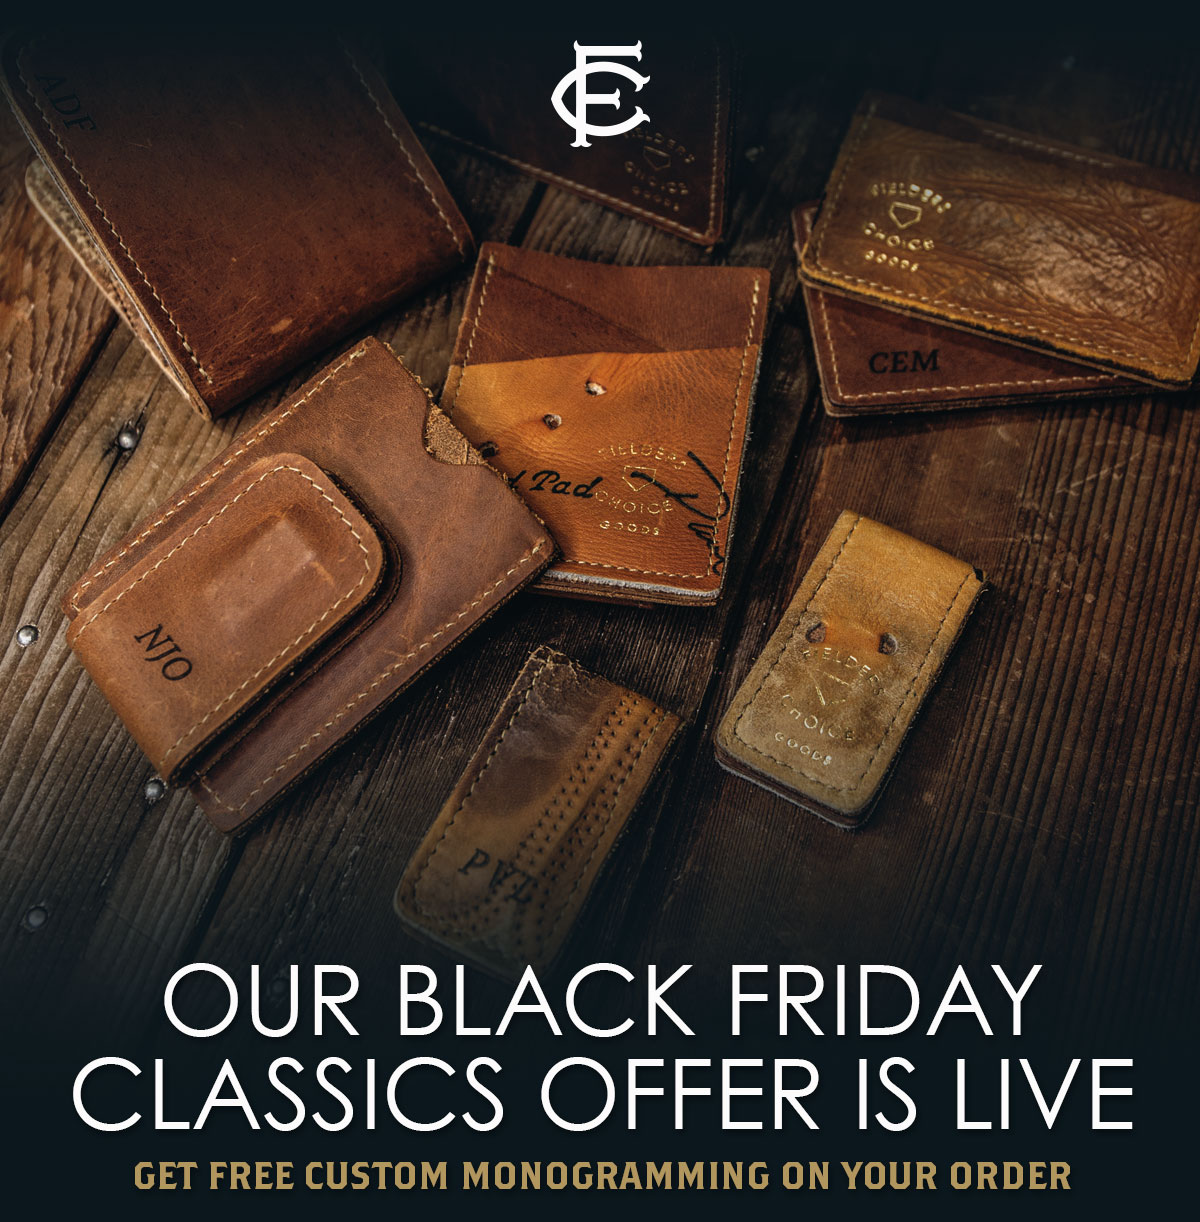 Our Black Friday Classics Offer Is Live